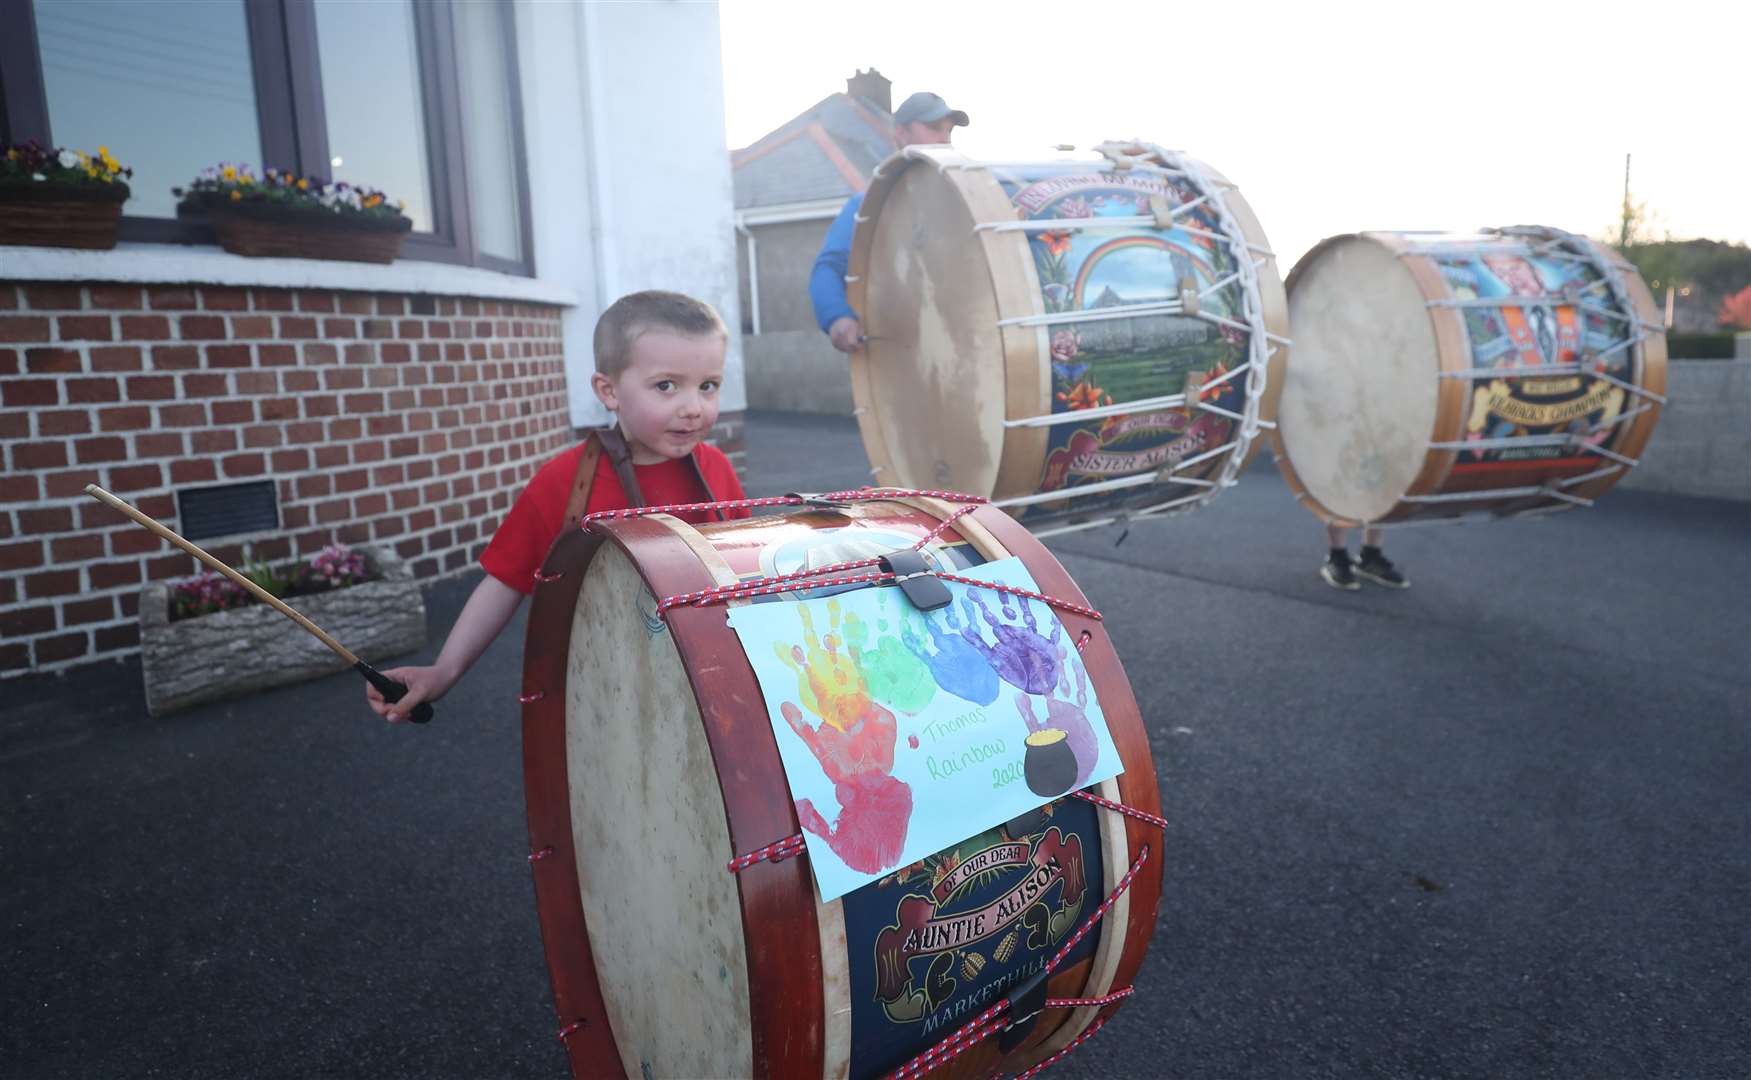 Thomas Black, four, from Market Hill in County Armagh, bangs a Lambeg drum to salute local heroes during a nationwide Clap for Carers initiative to recognise and support NHS workers and carers fighting the coronavirus pandemic (Niall Carson/PA)